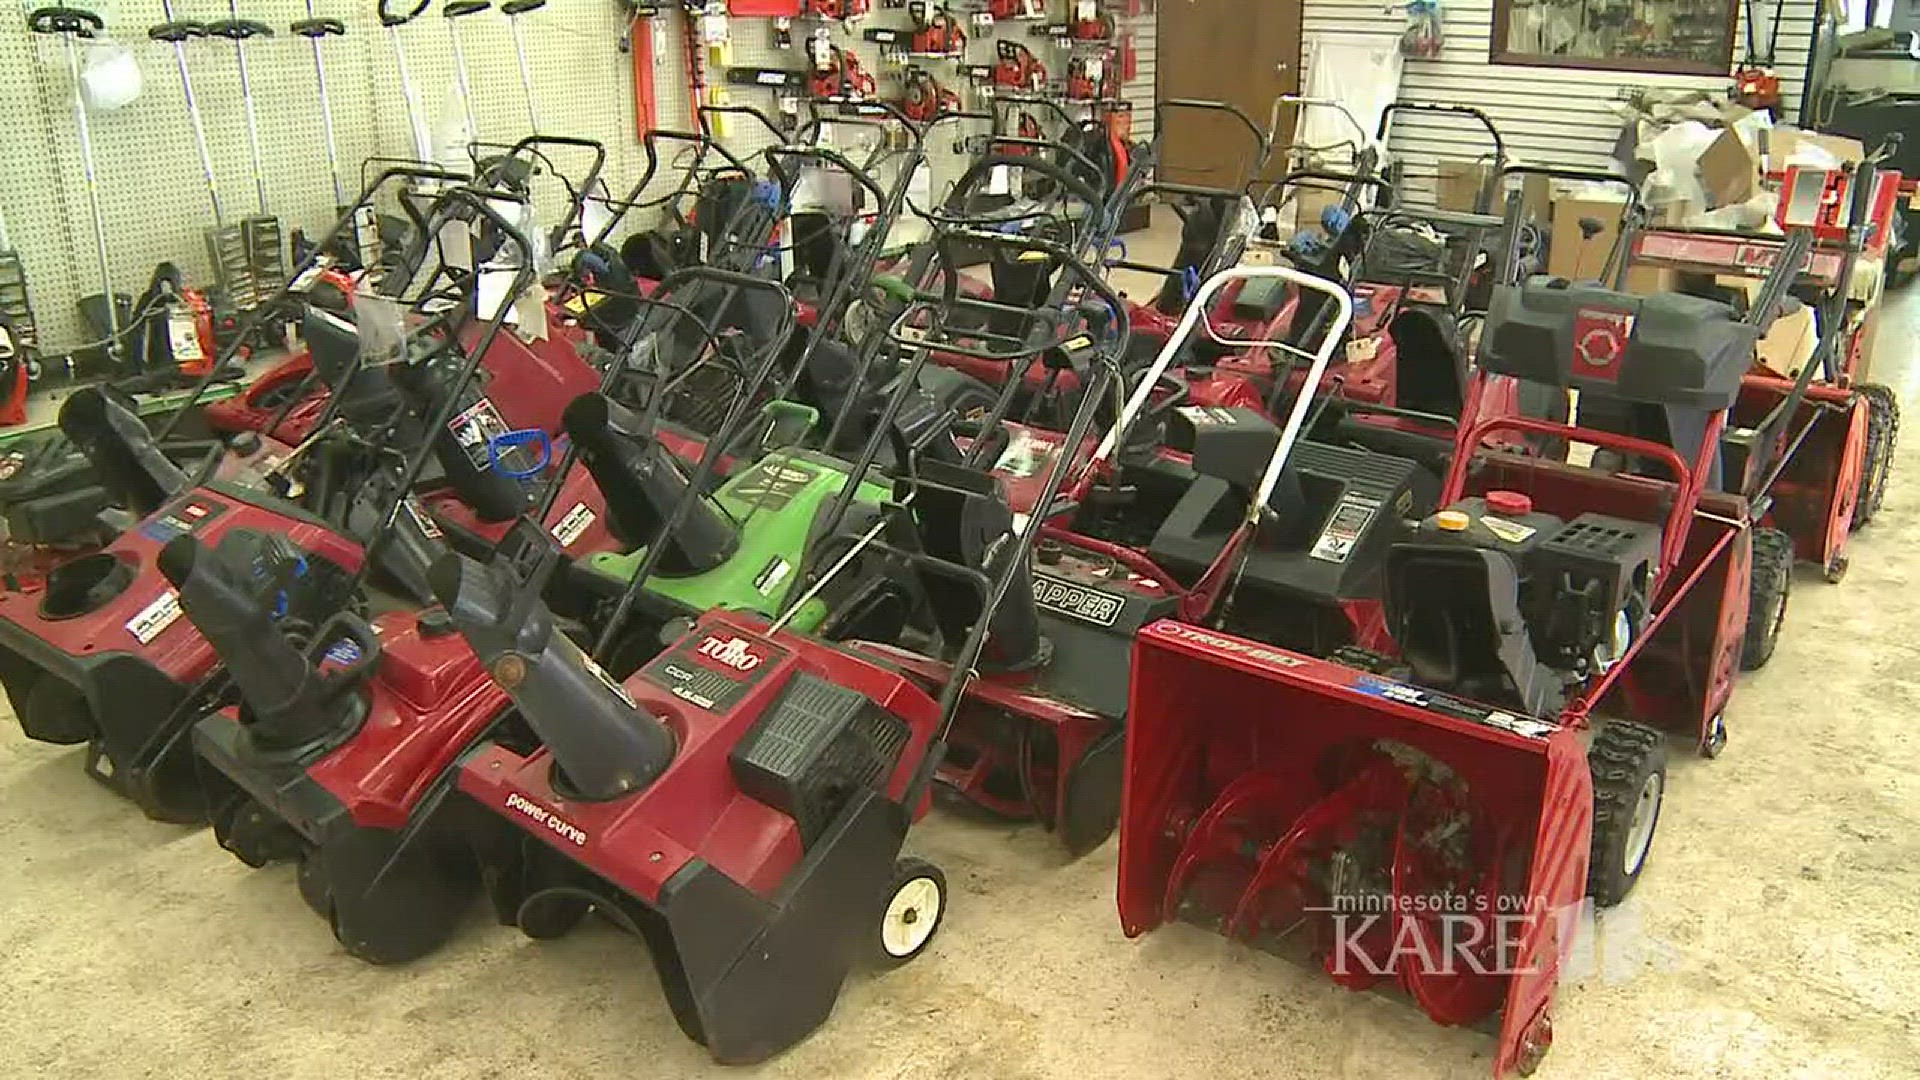 This winter, snowblowers have been a must for a lot of people. With all the recent snow, many of those who don't have one are rethinking that. KARE 11's Gordon Severson shows us what to look for if you're buying a used snowblower.